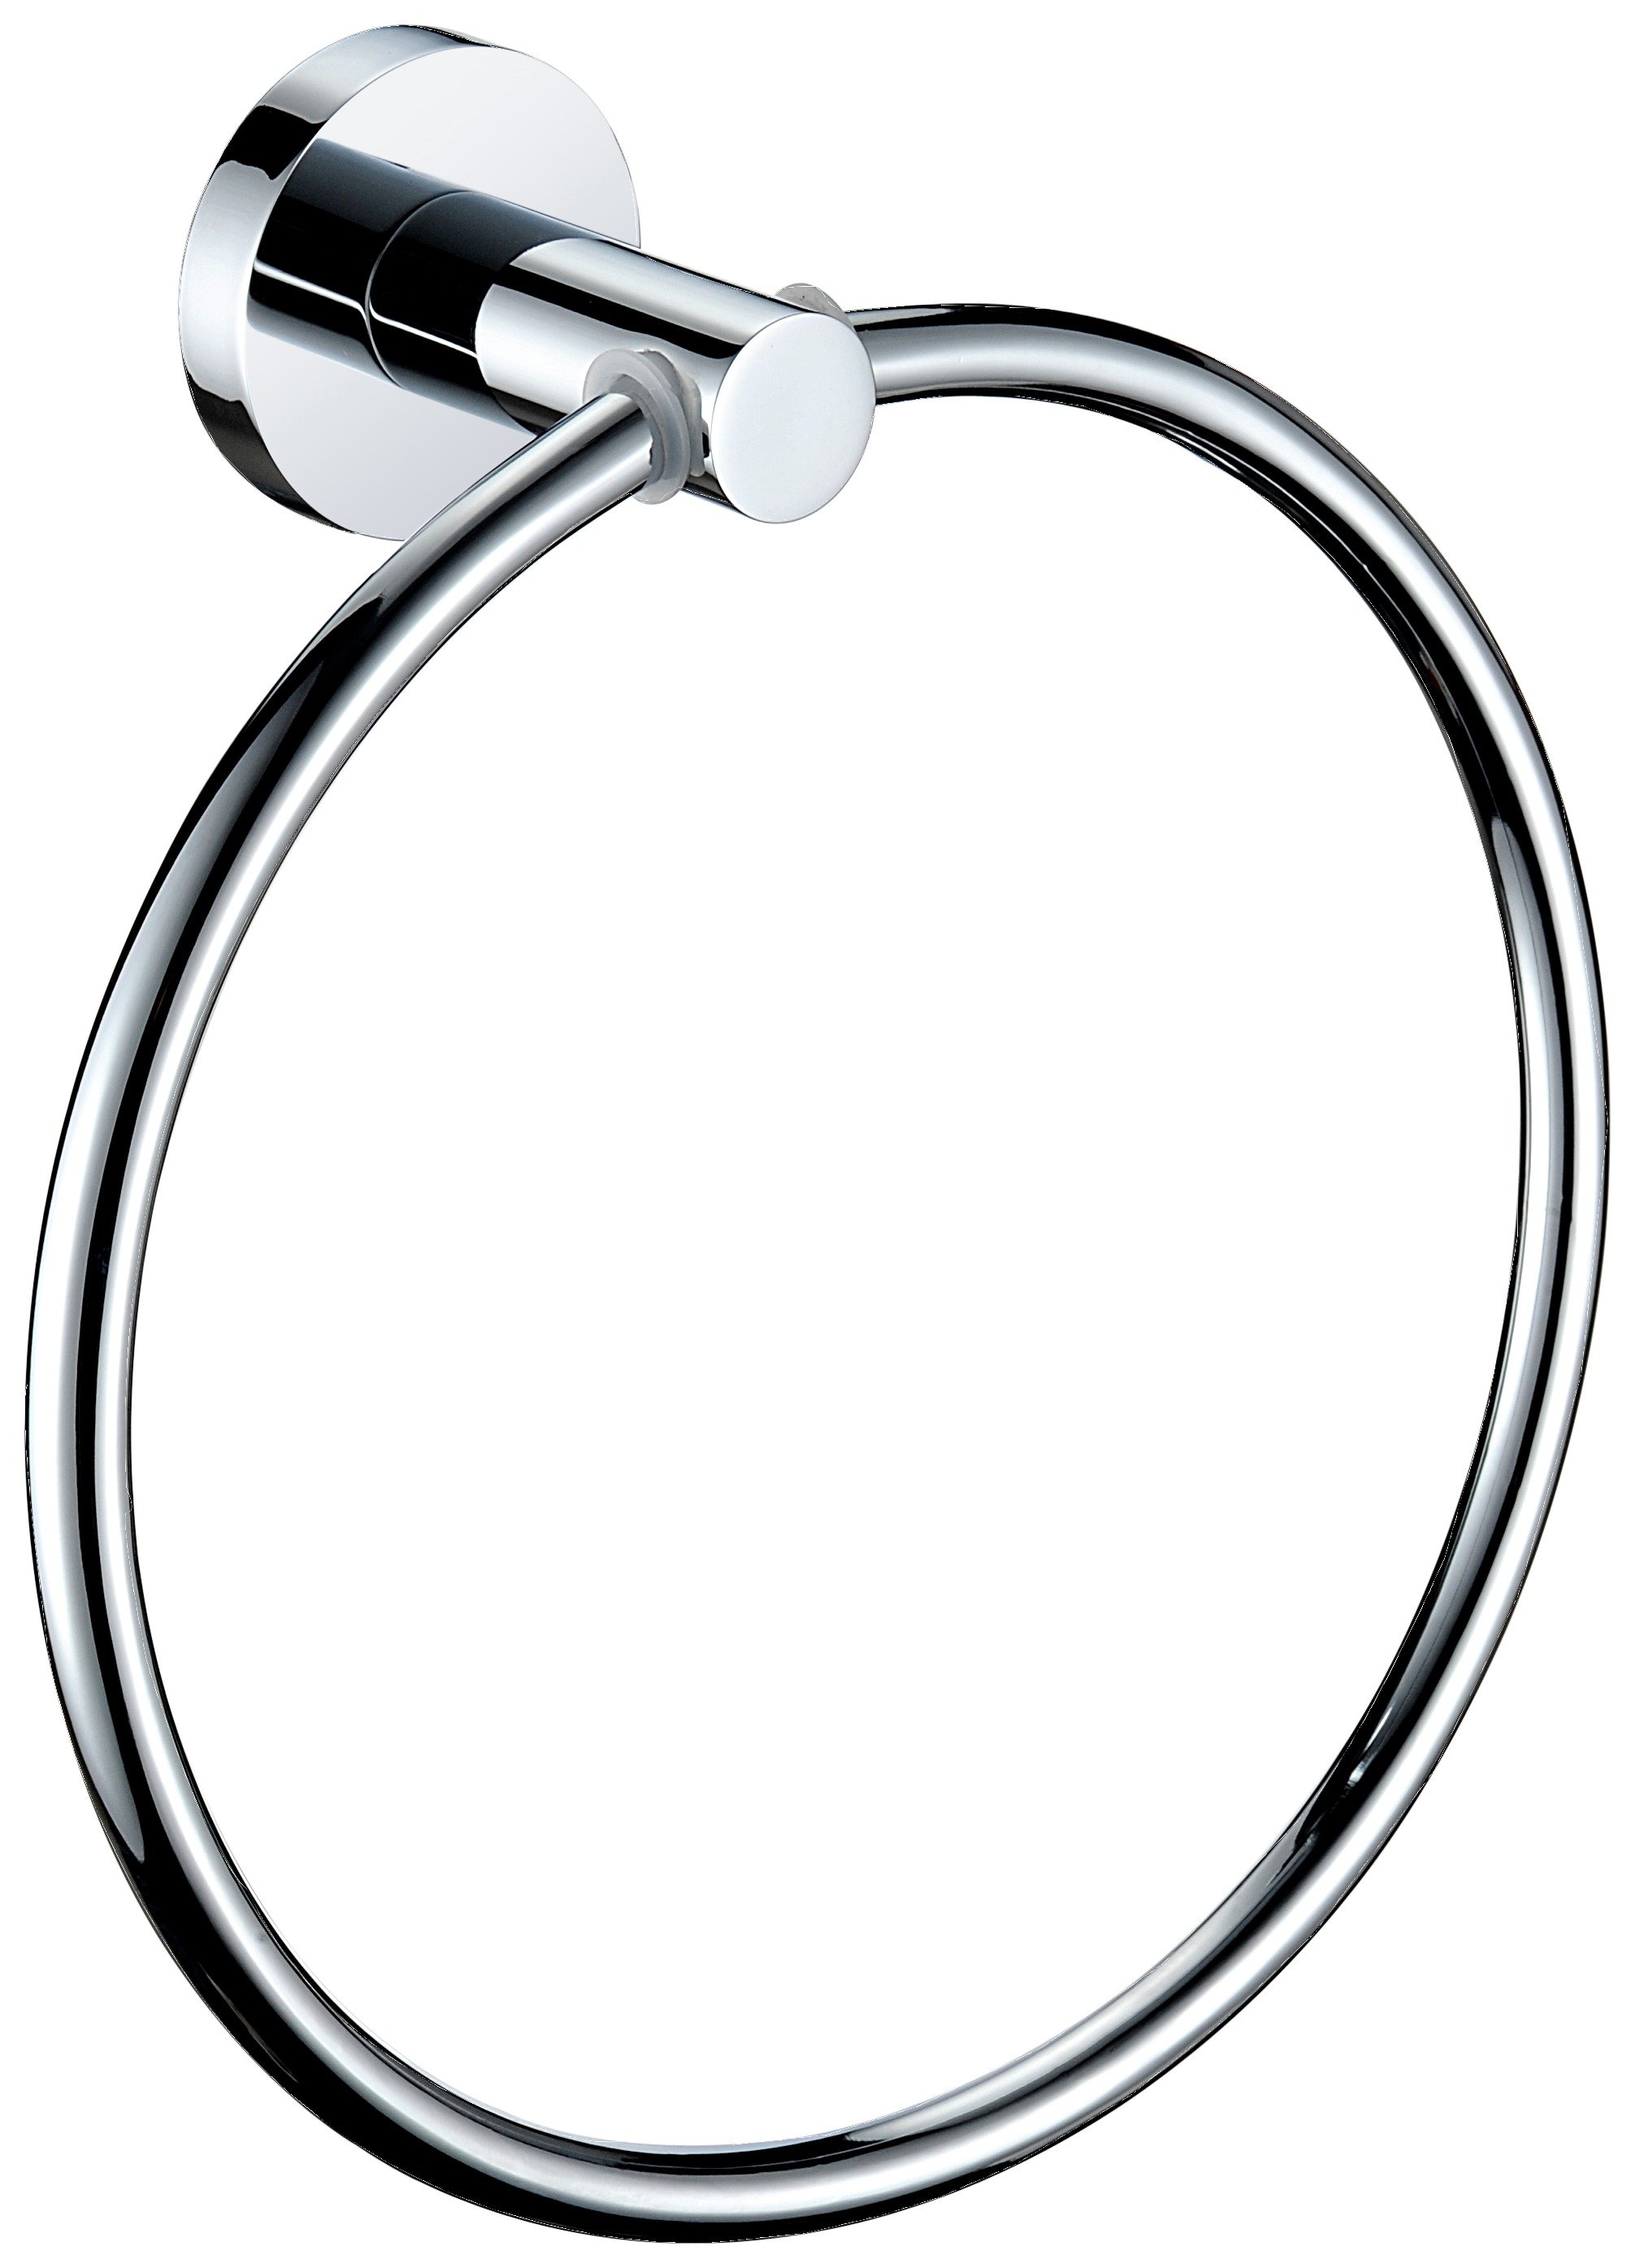 Bristan Round Wall Mounted Towel Ring